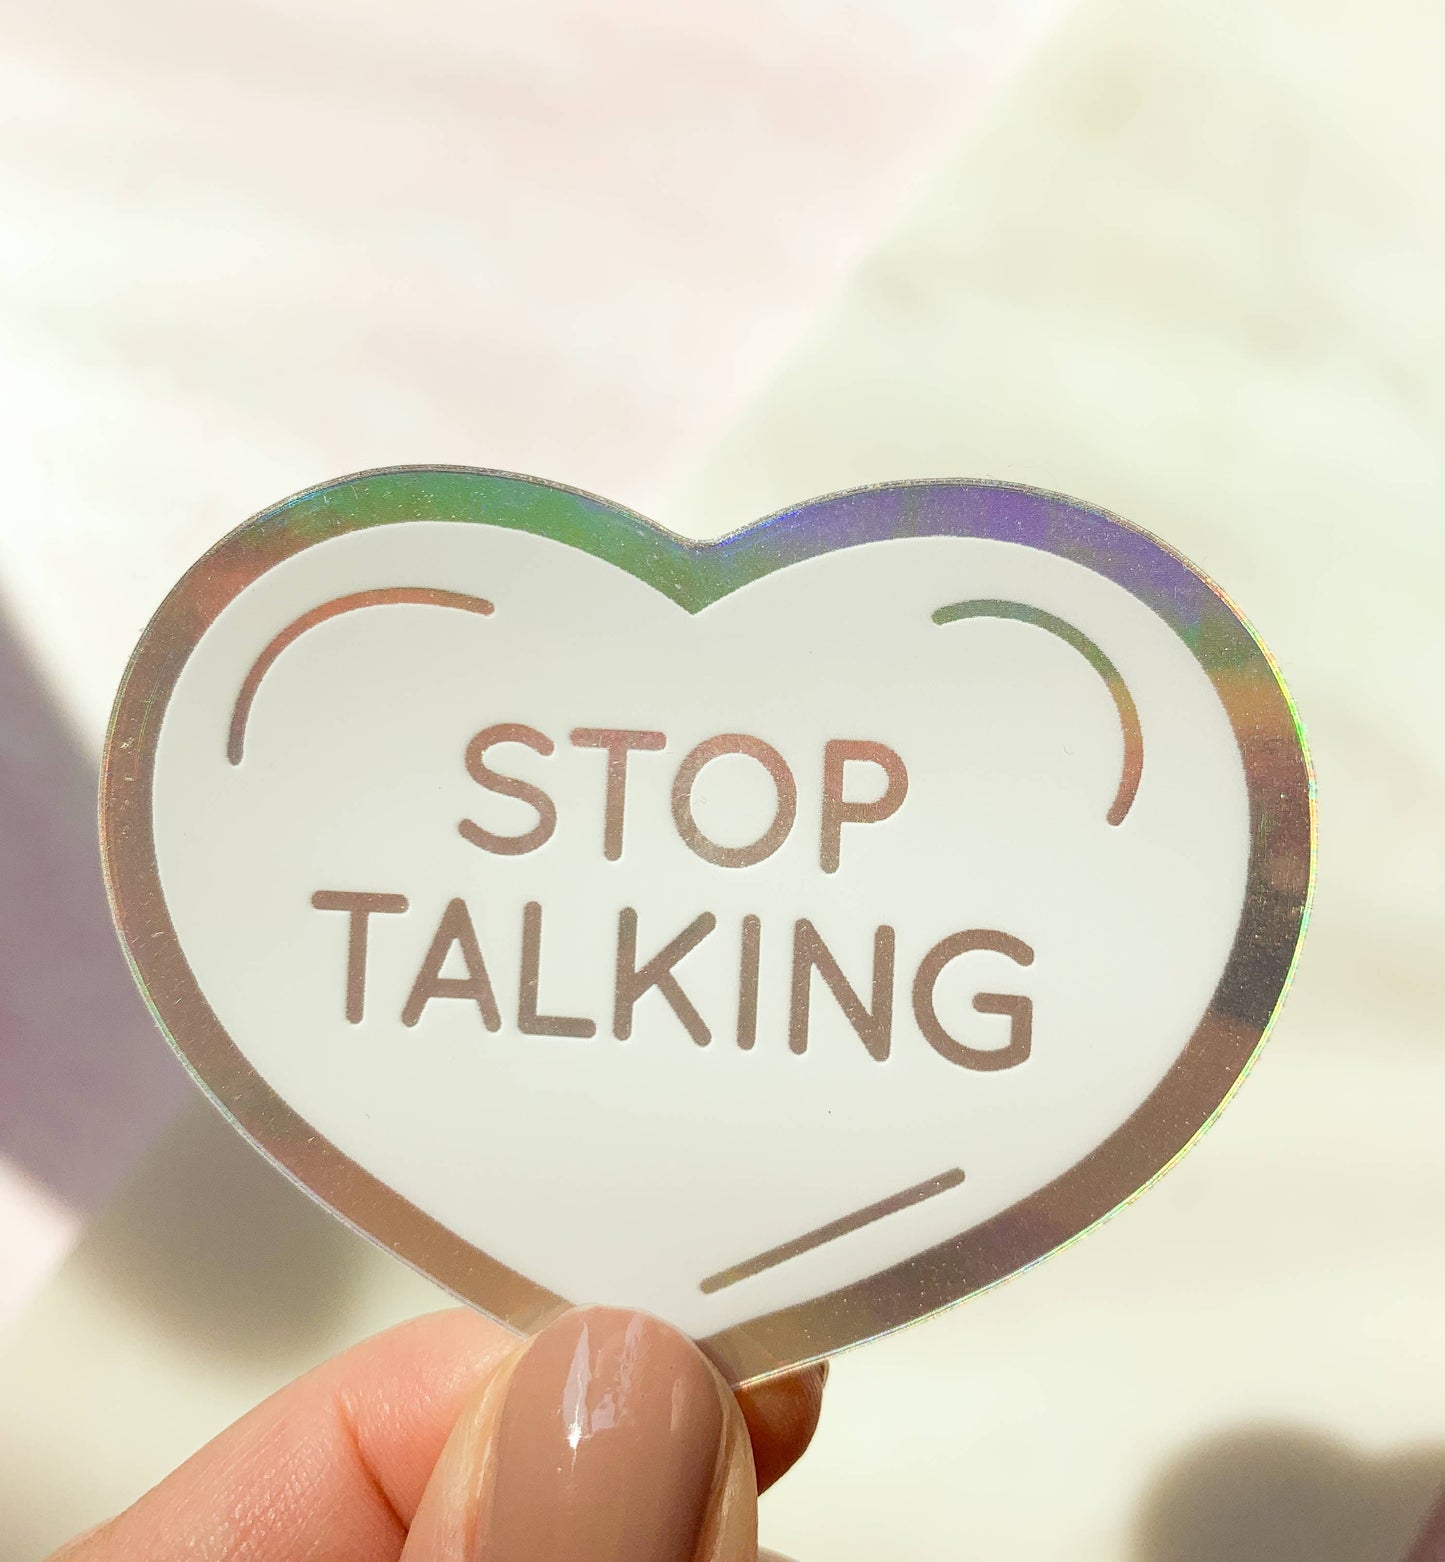 Stop Talking Conversation Heart Holographic Sticker - homesewn